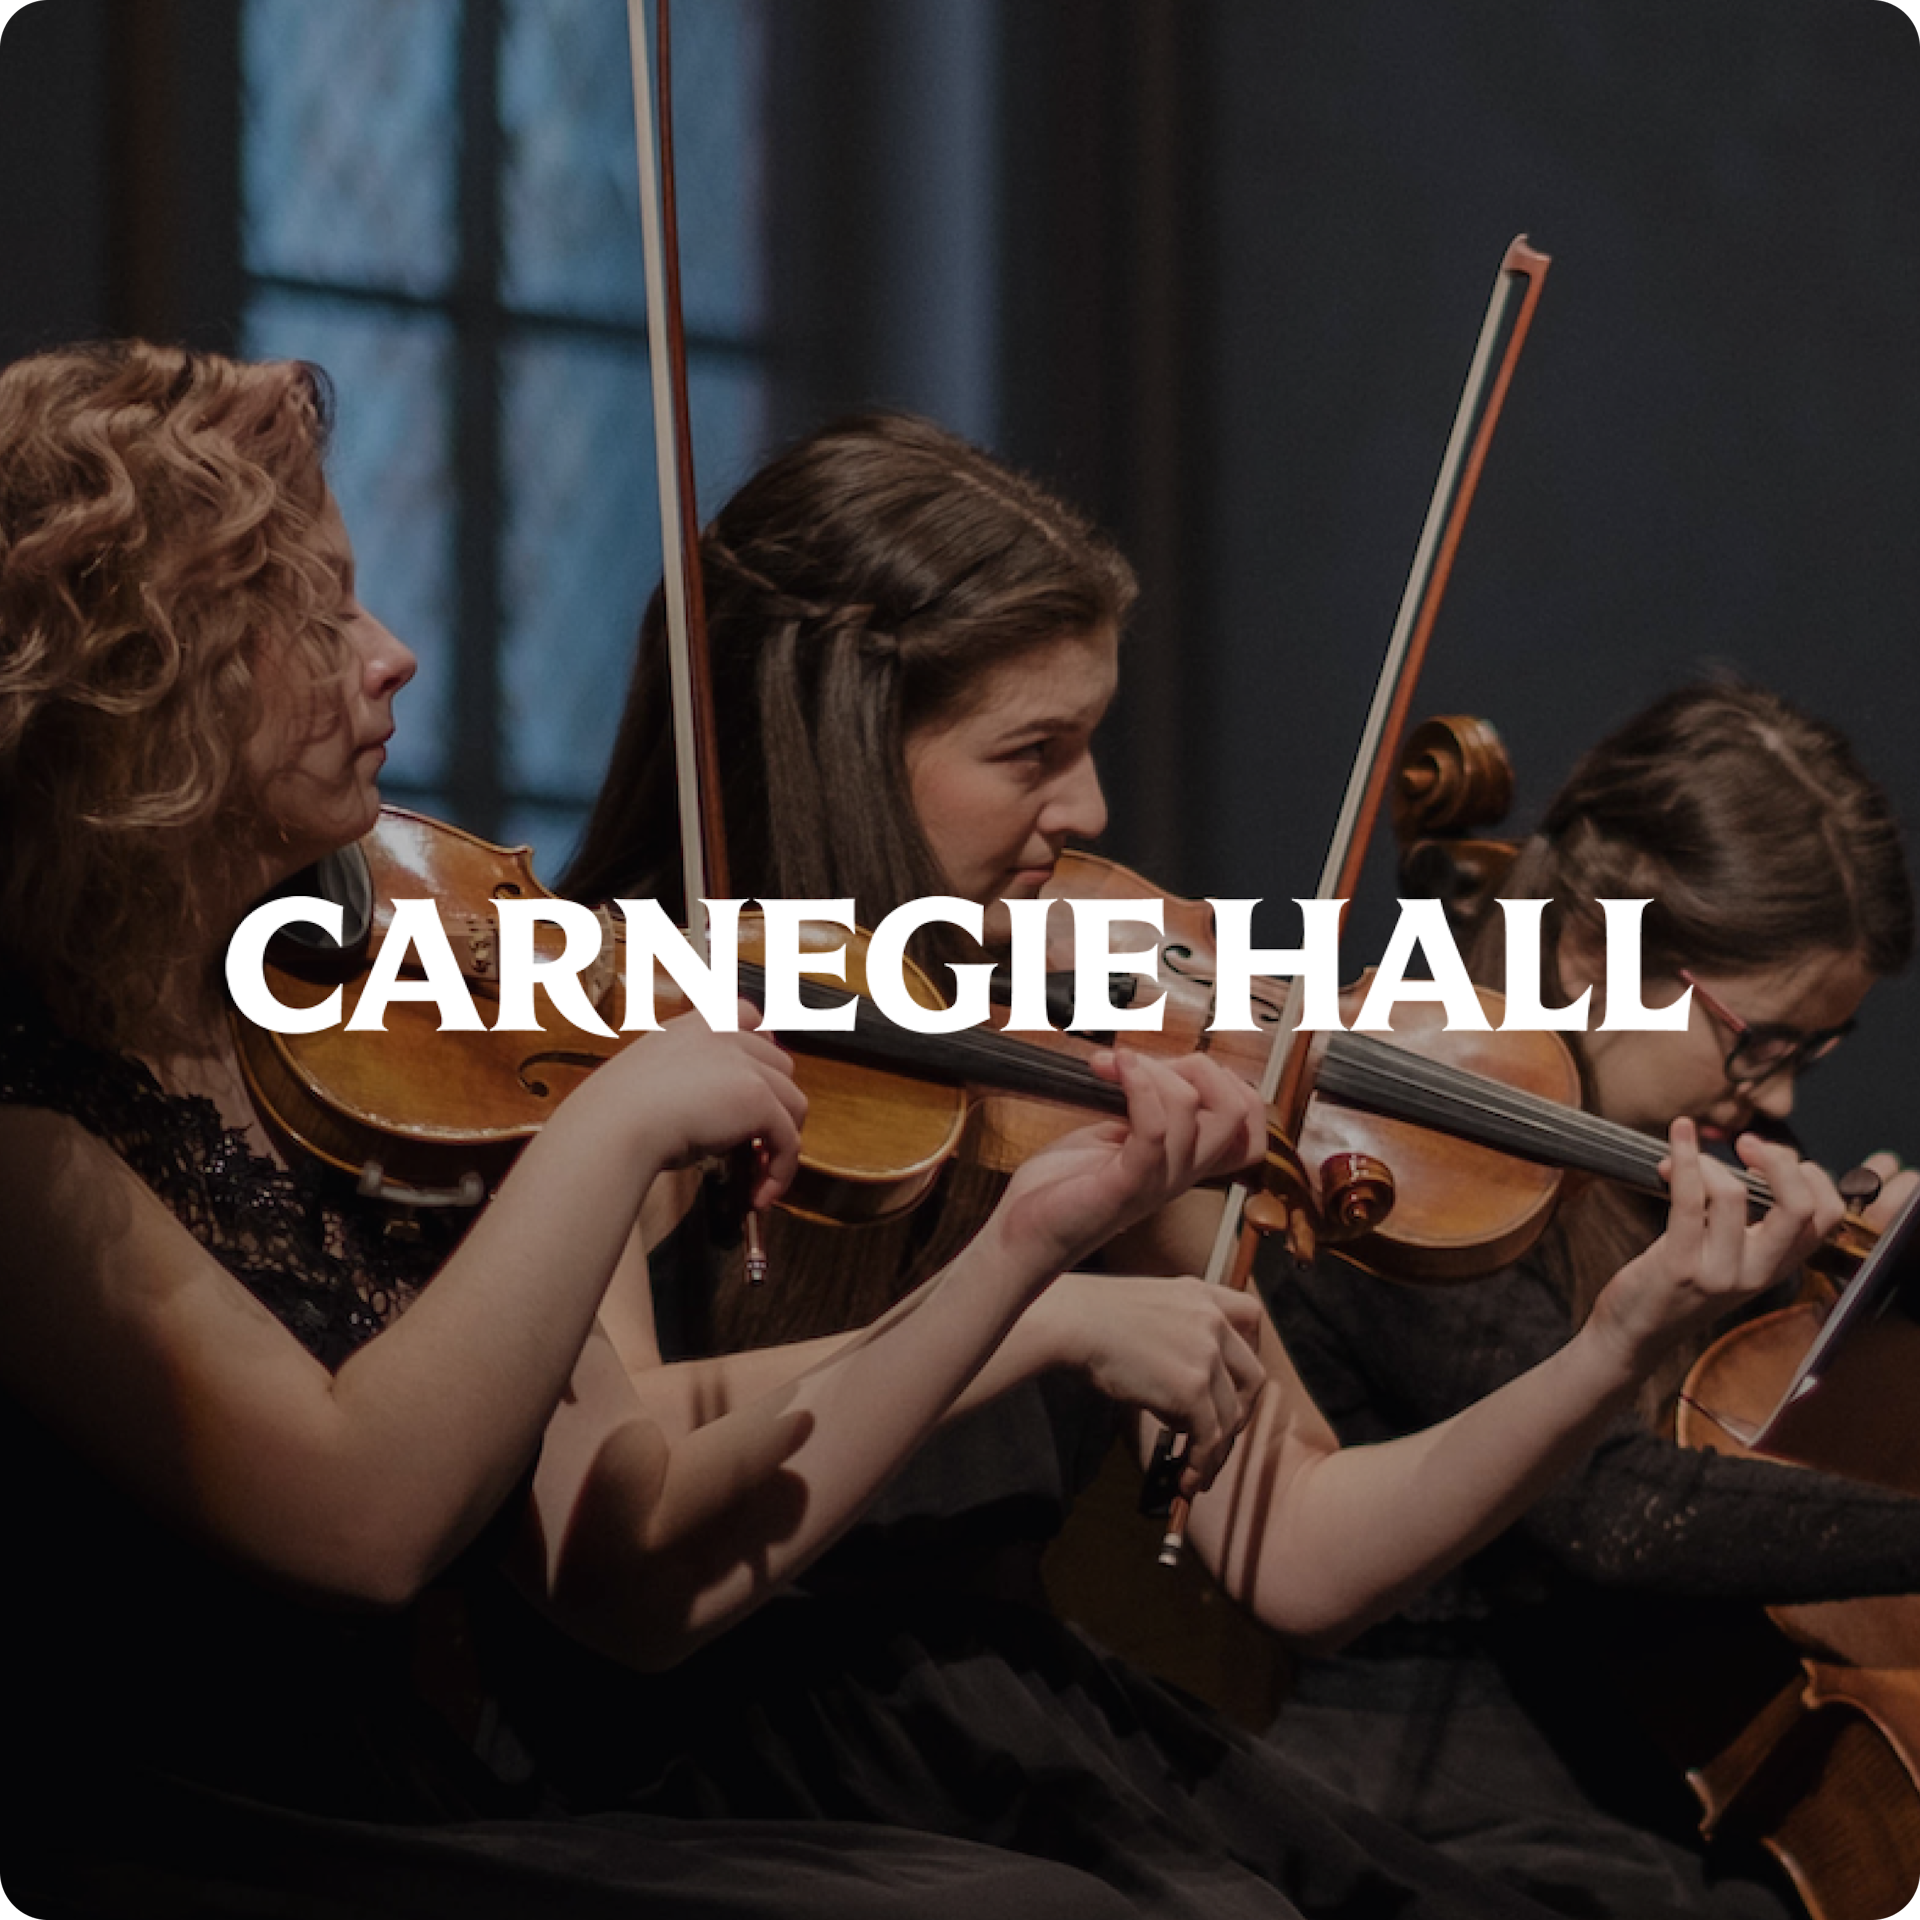 Designs we did for Carnegie Hall